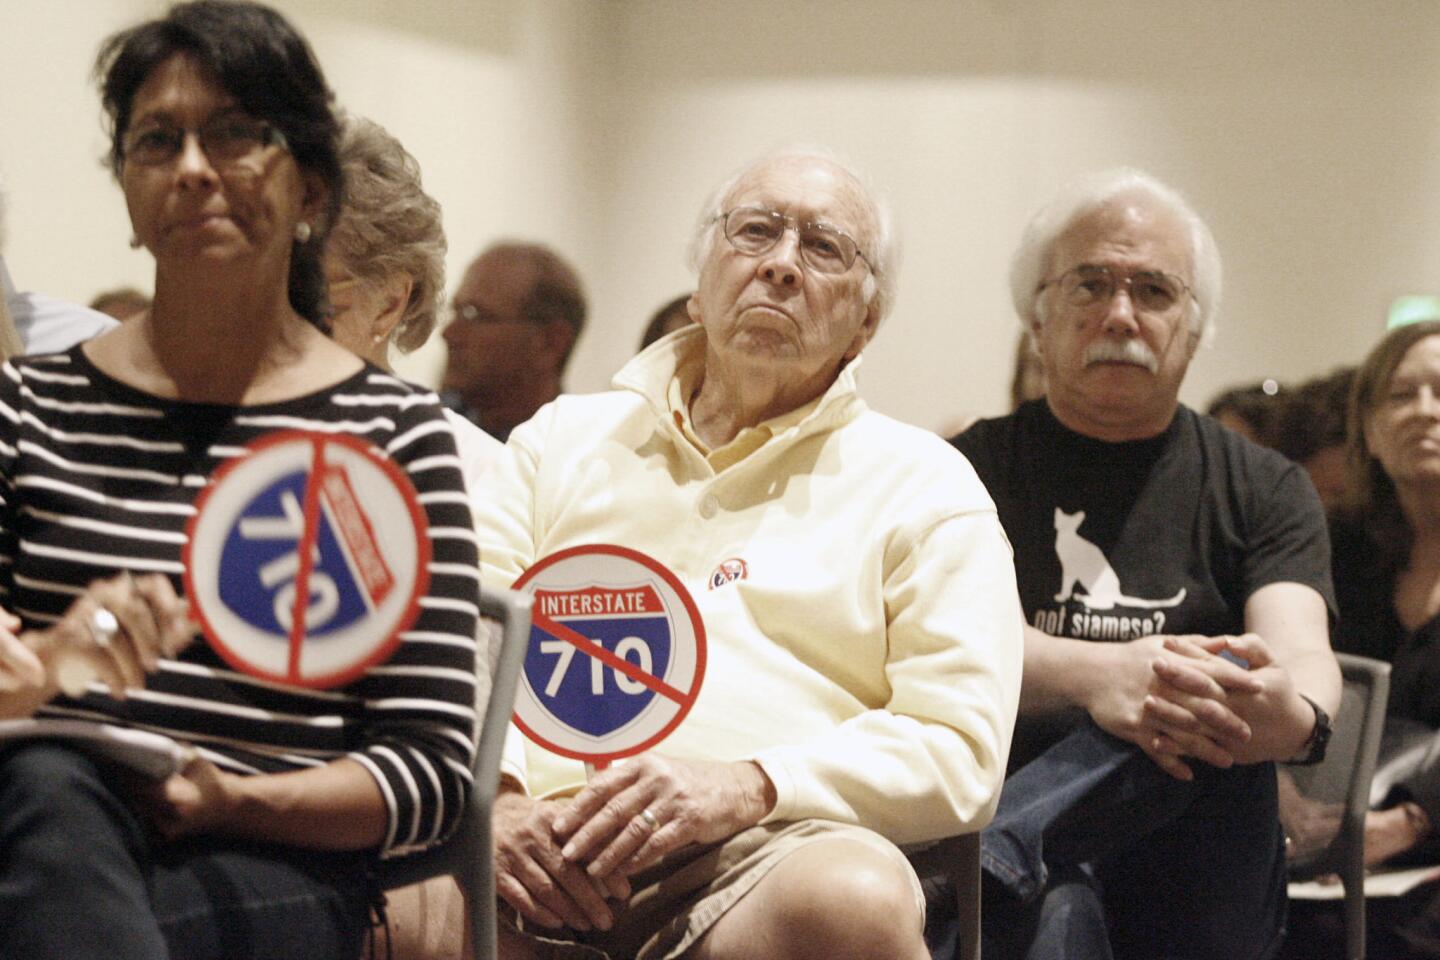 Rebecca Hoist, from left, Ray Skelly and Stan Sieger attend a panel discussion about the 710 freeway extension proposal, which took place at the Pasadena Convention Center on Tuesday, September 18, 2012.